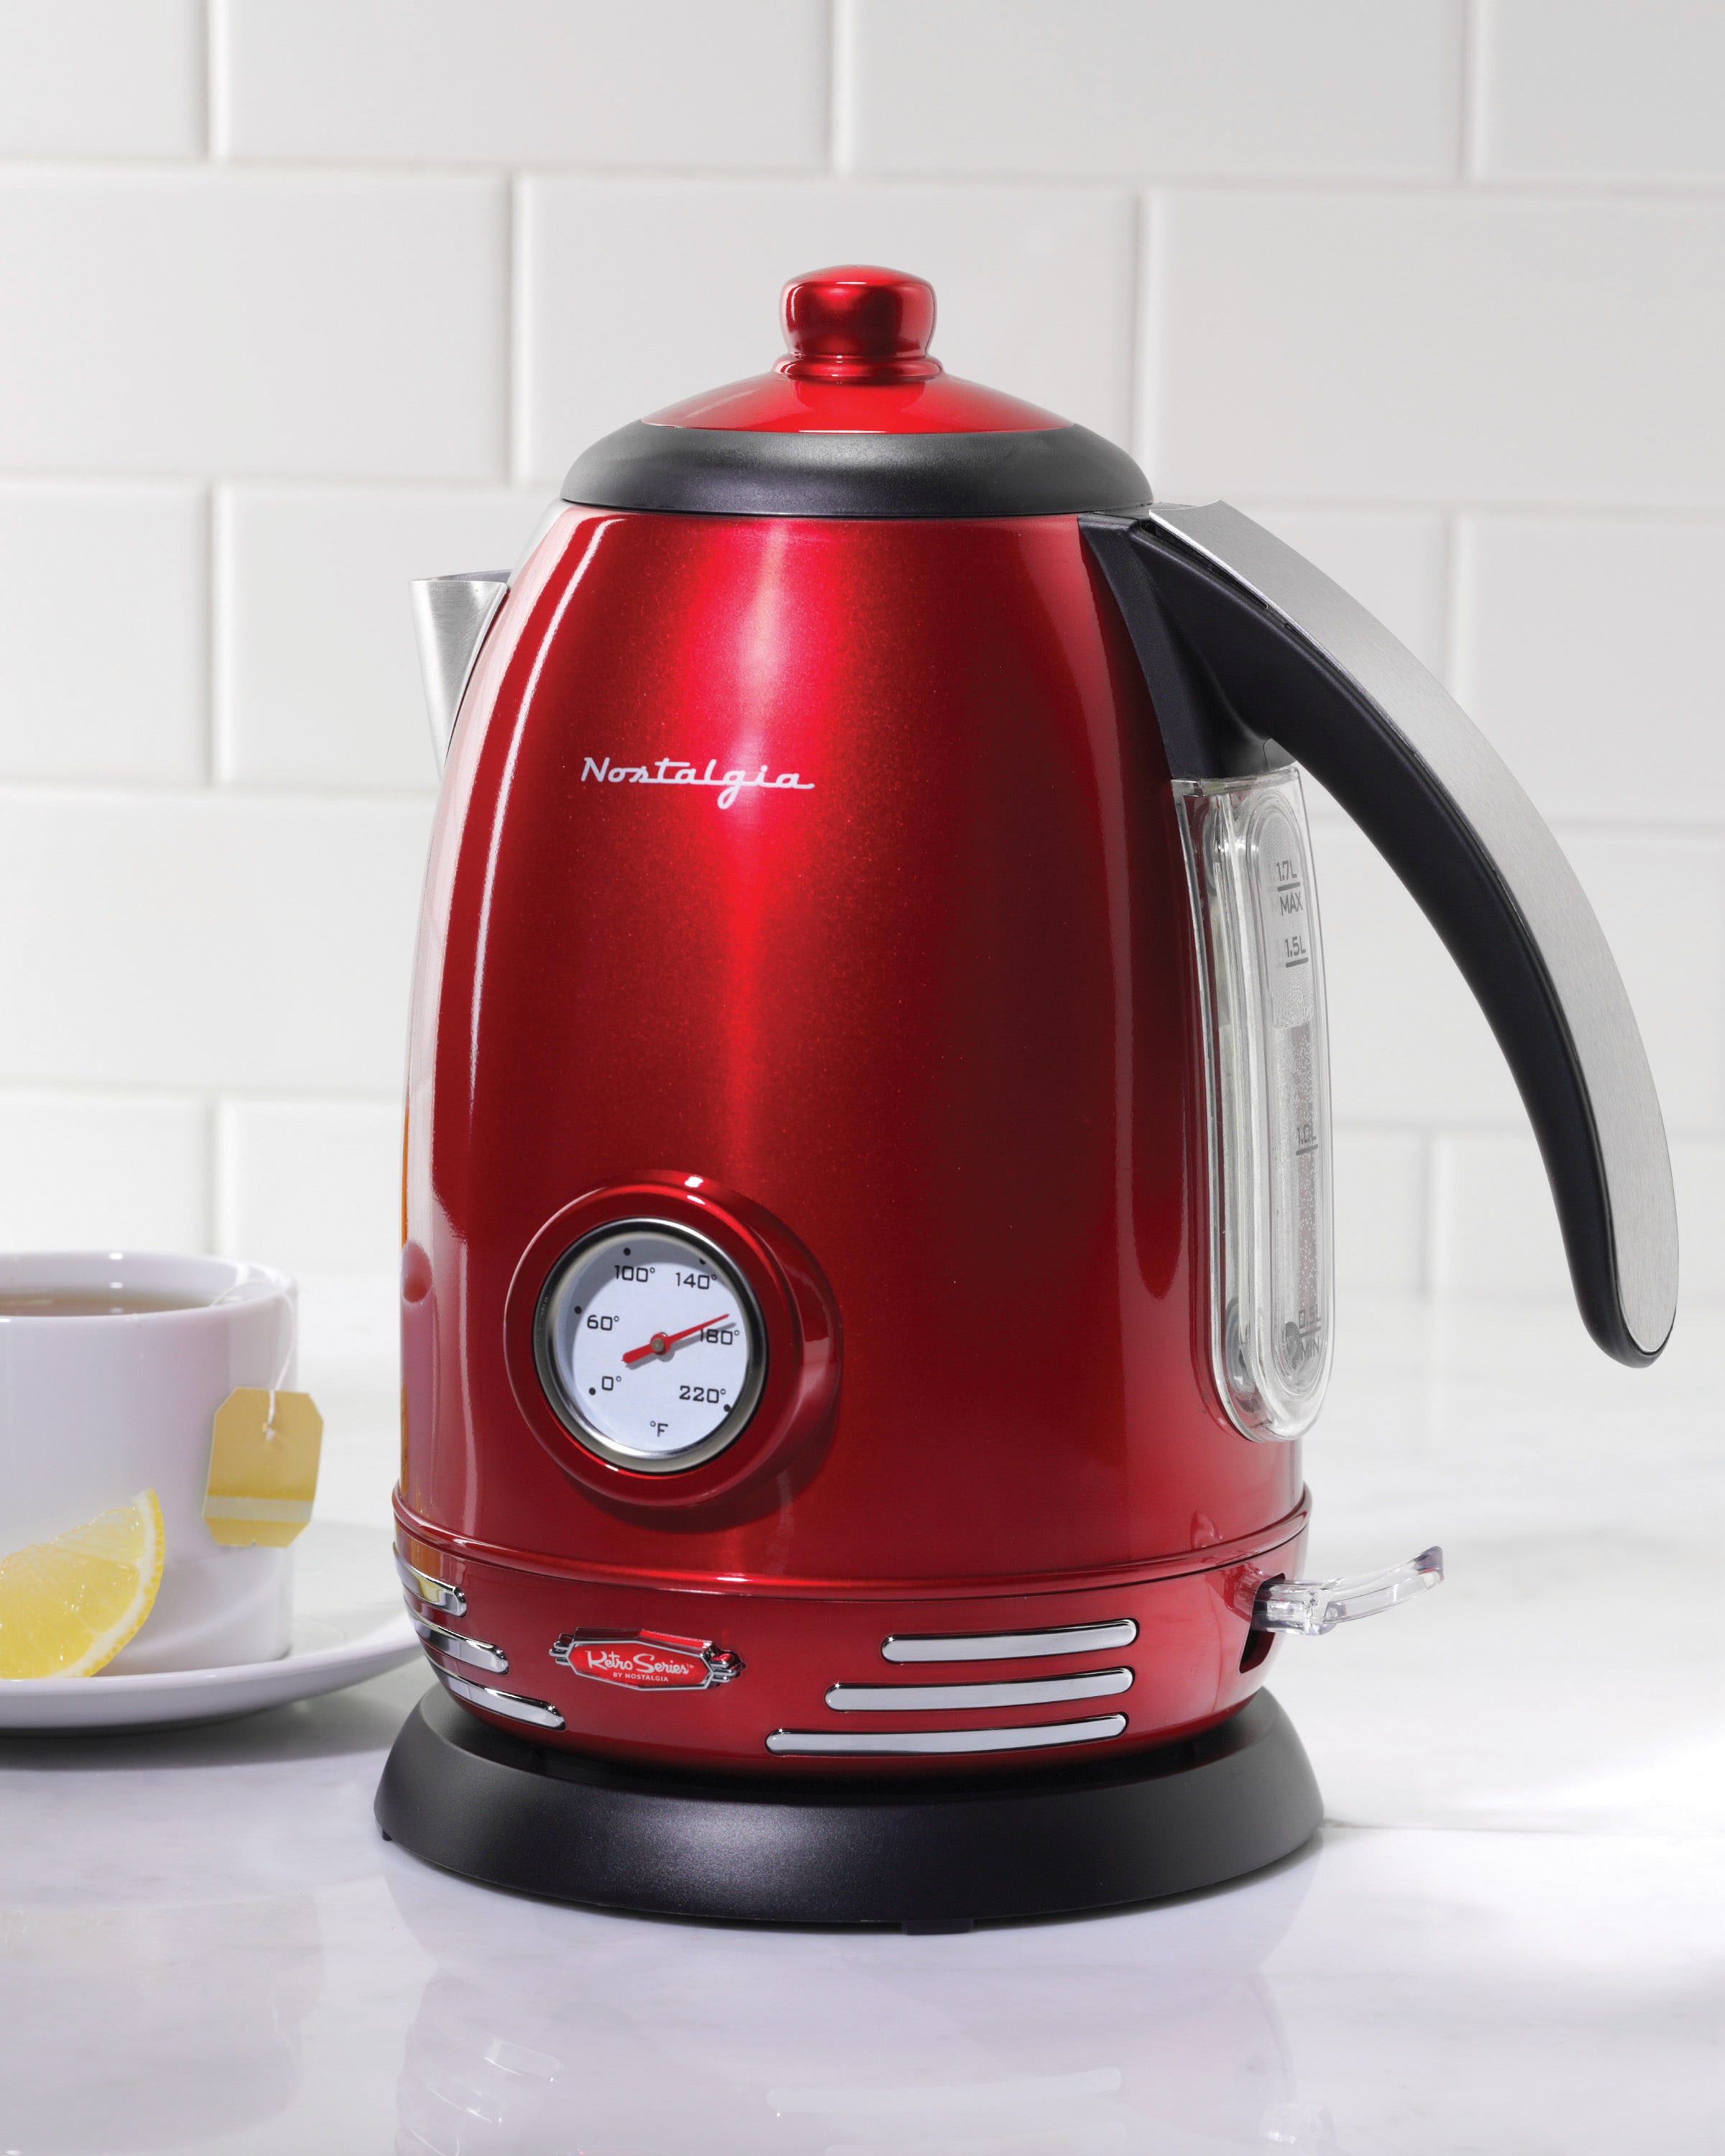 West Bend Retro-Style 1.7L Electric Kettle